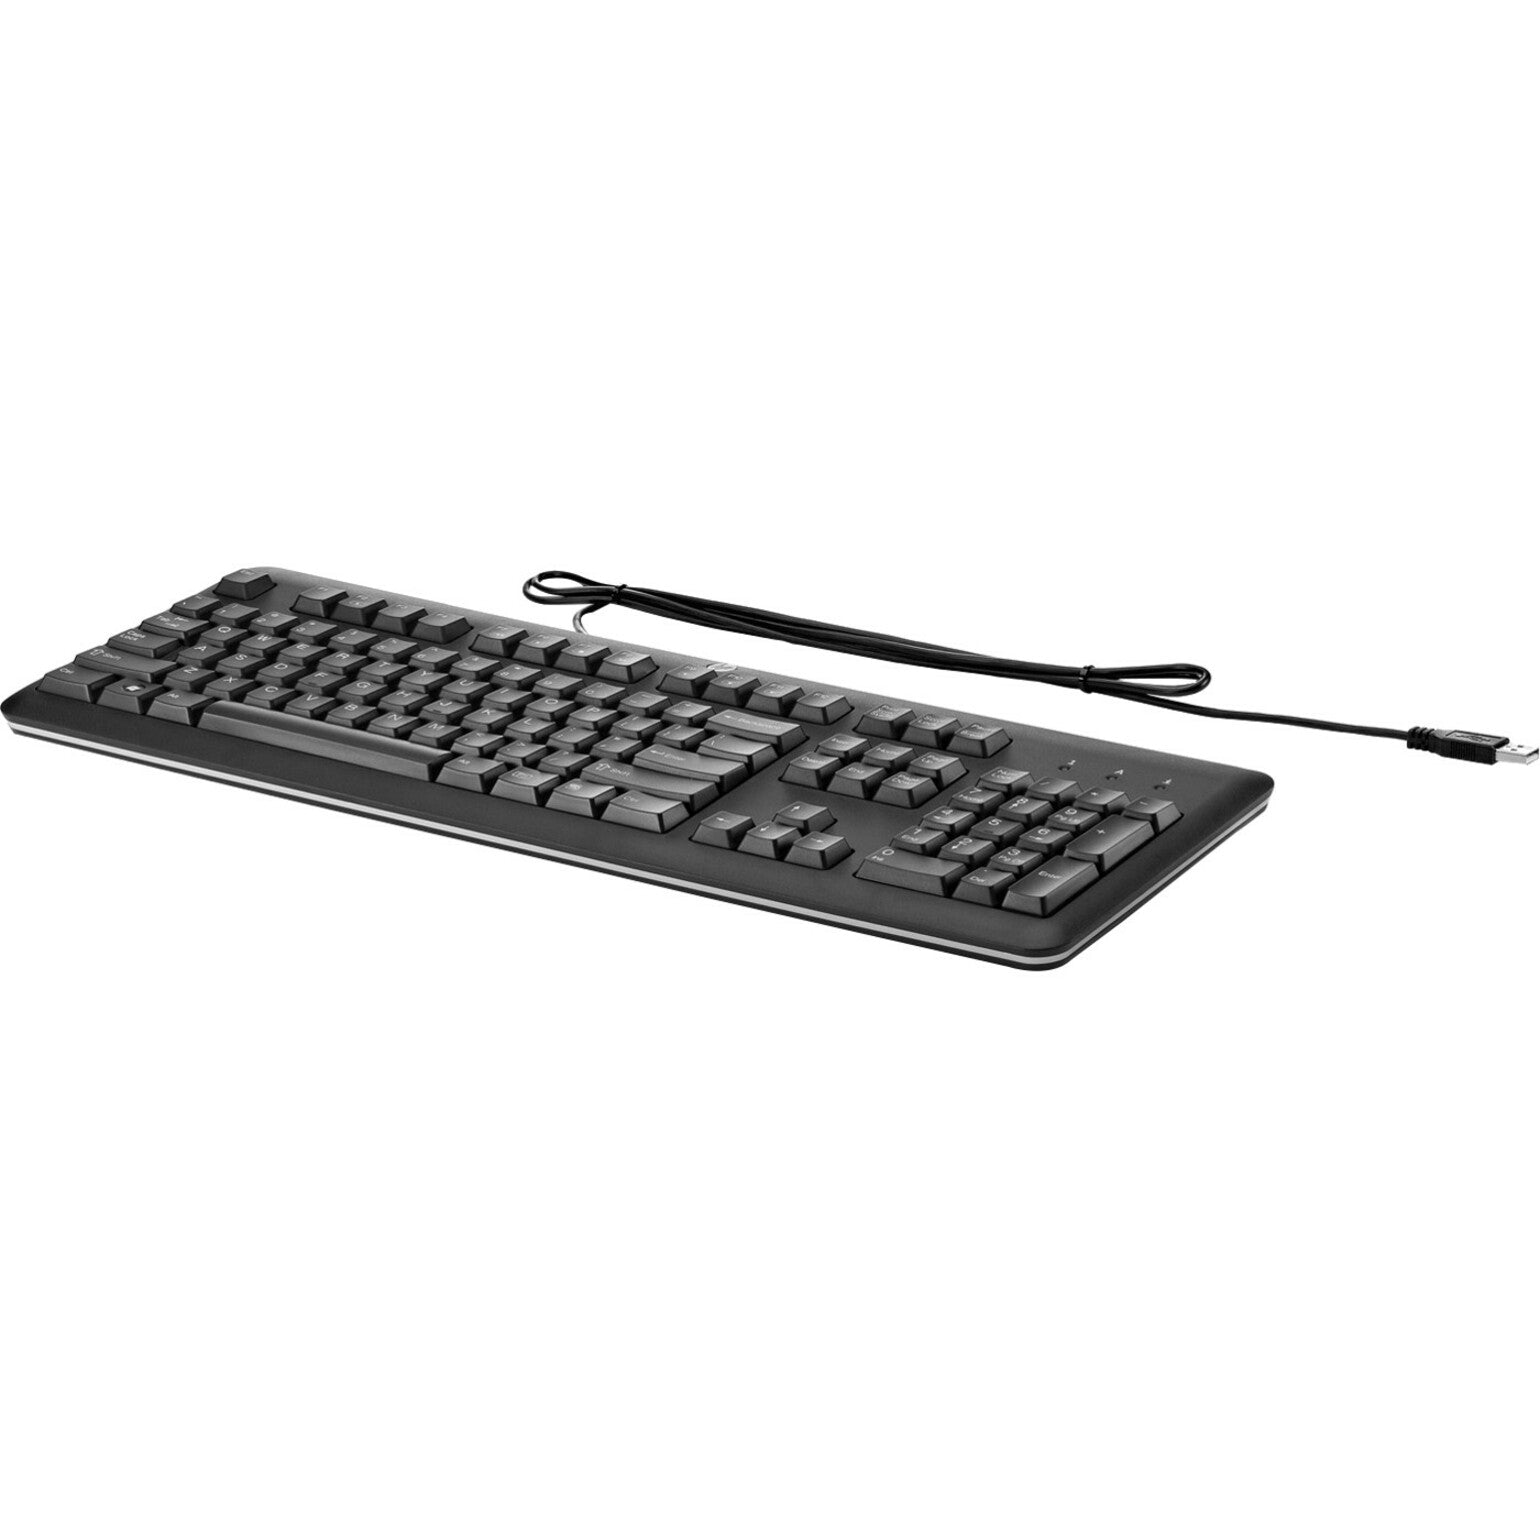 HP USB Keyboard US, Spill Drain, 6 ft Cable, English Localization